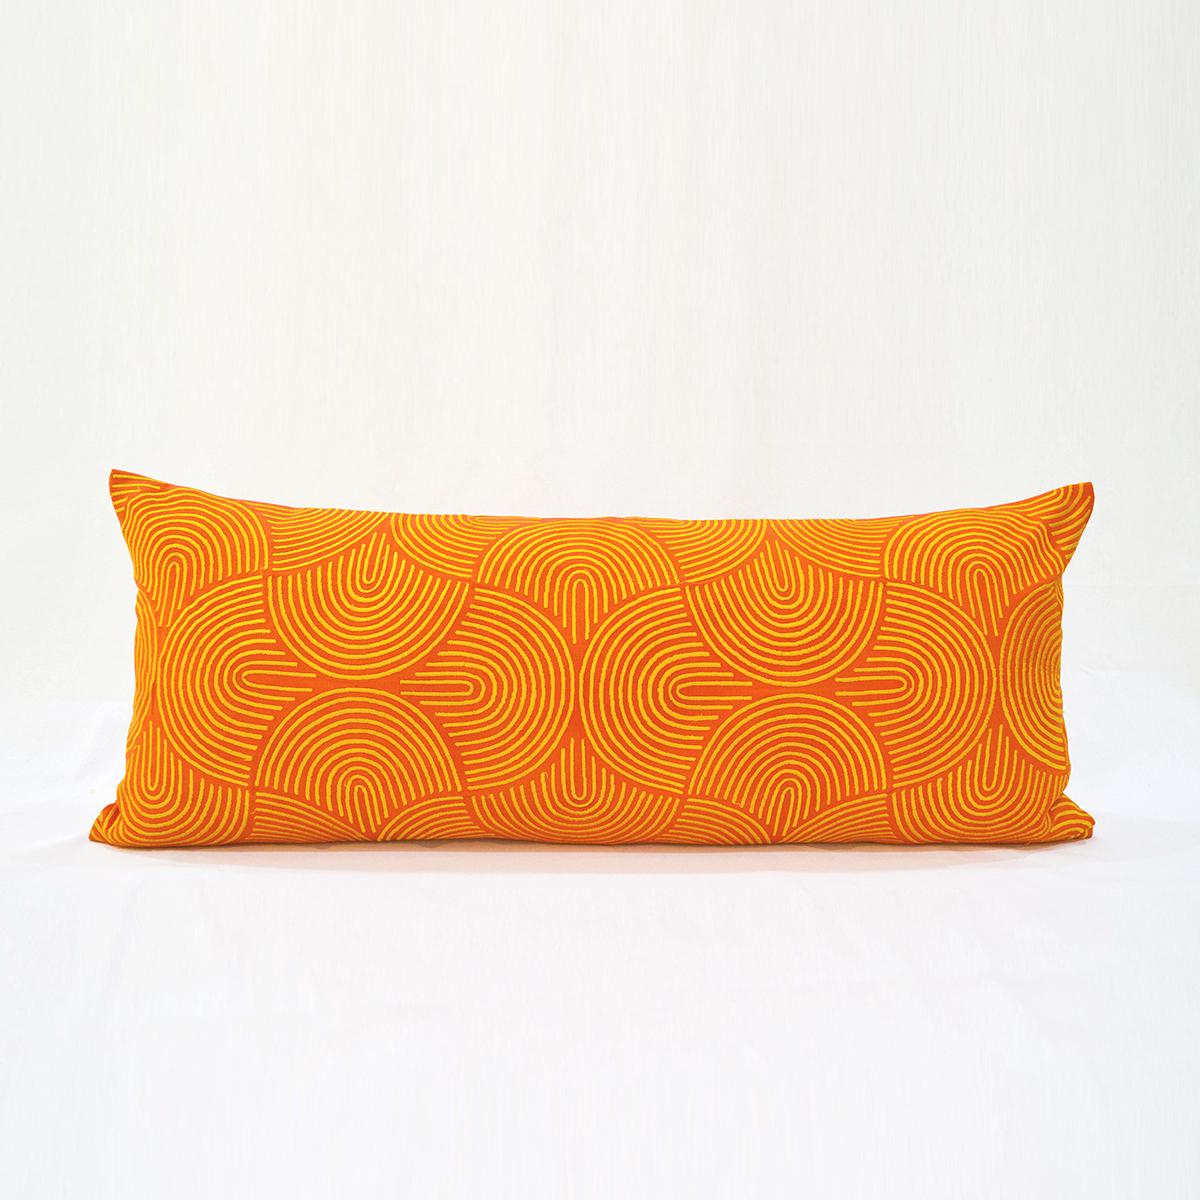 Tangerine modern retro pattern embroidered cotton pillow cover, long lumbar pillow cover & other sizes available